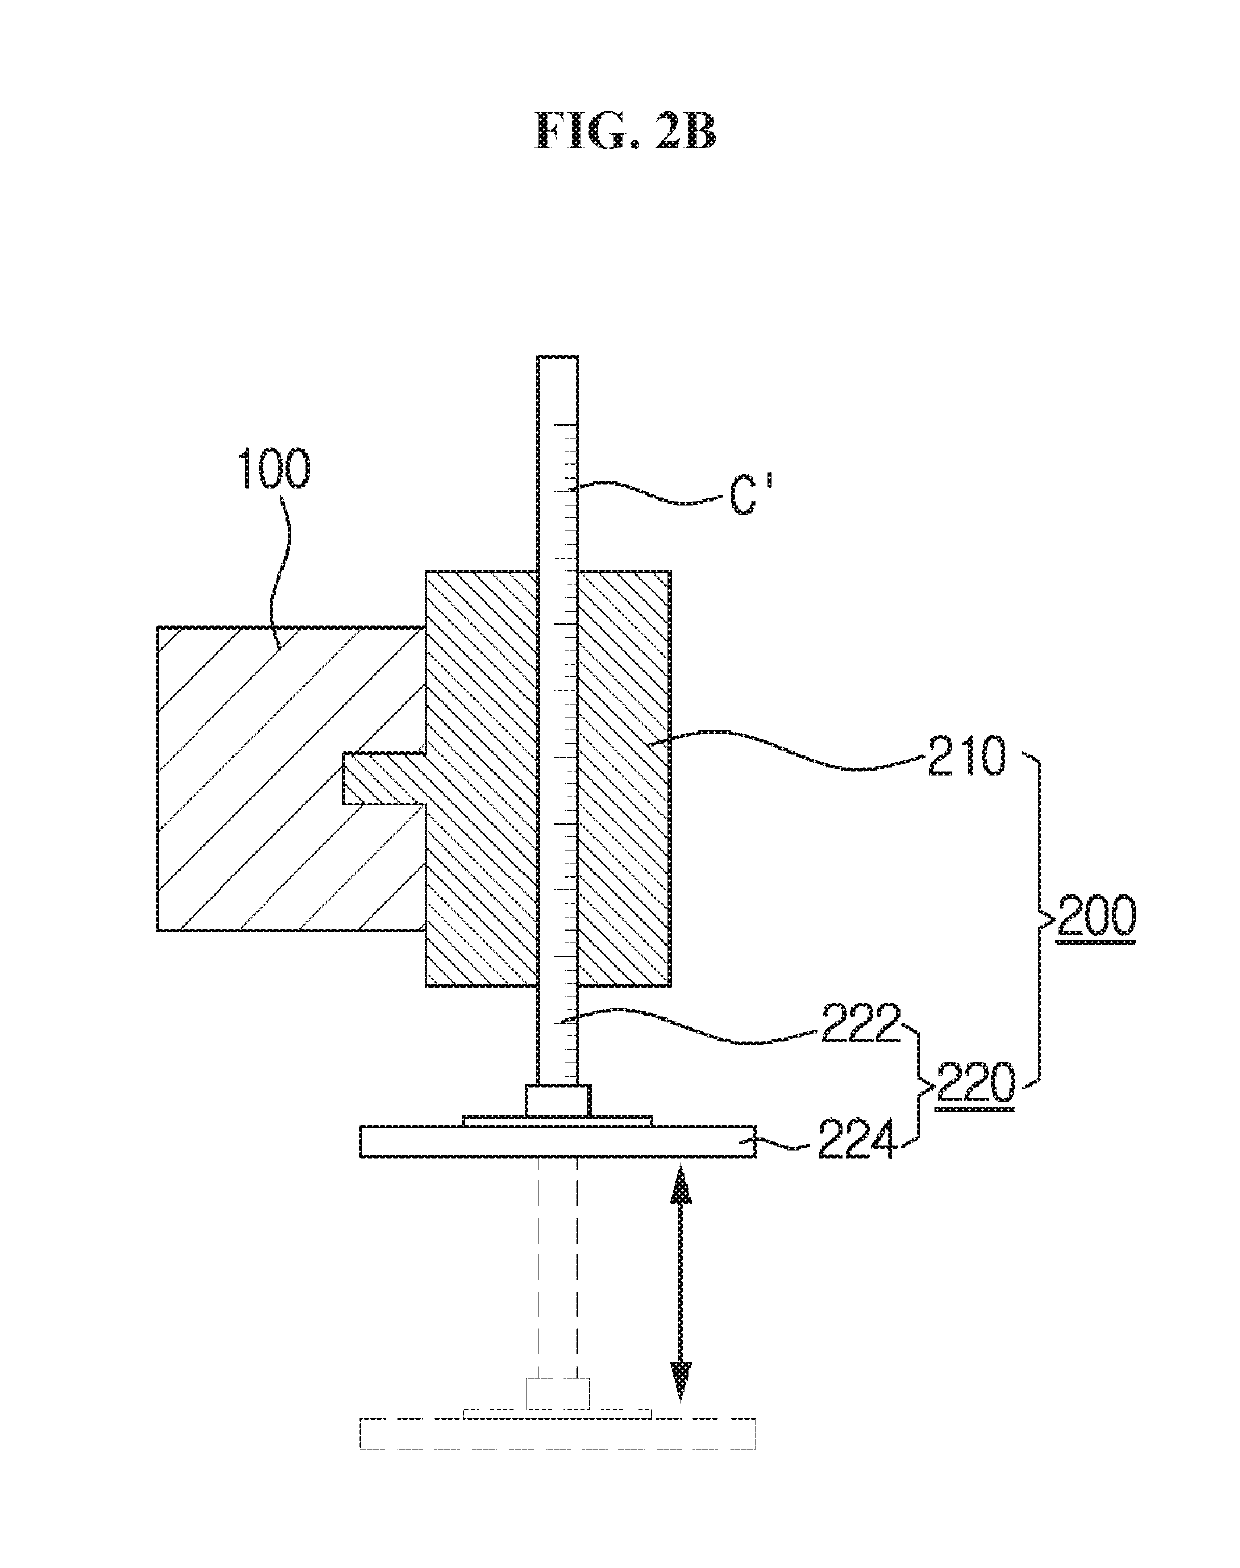 Apparatus for testing an object